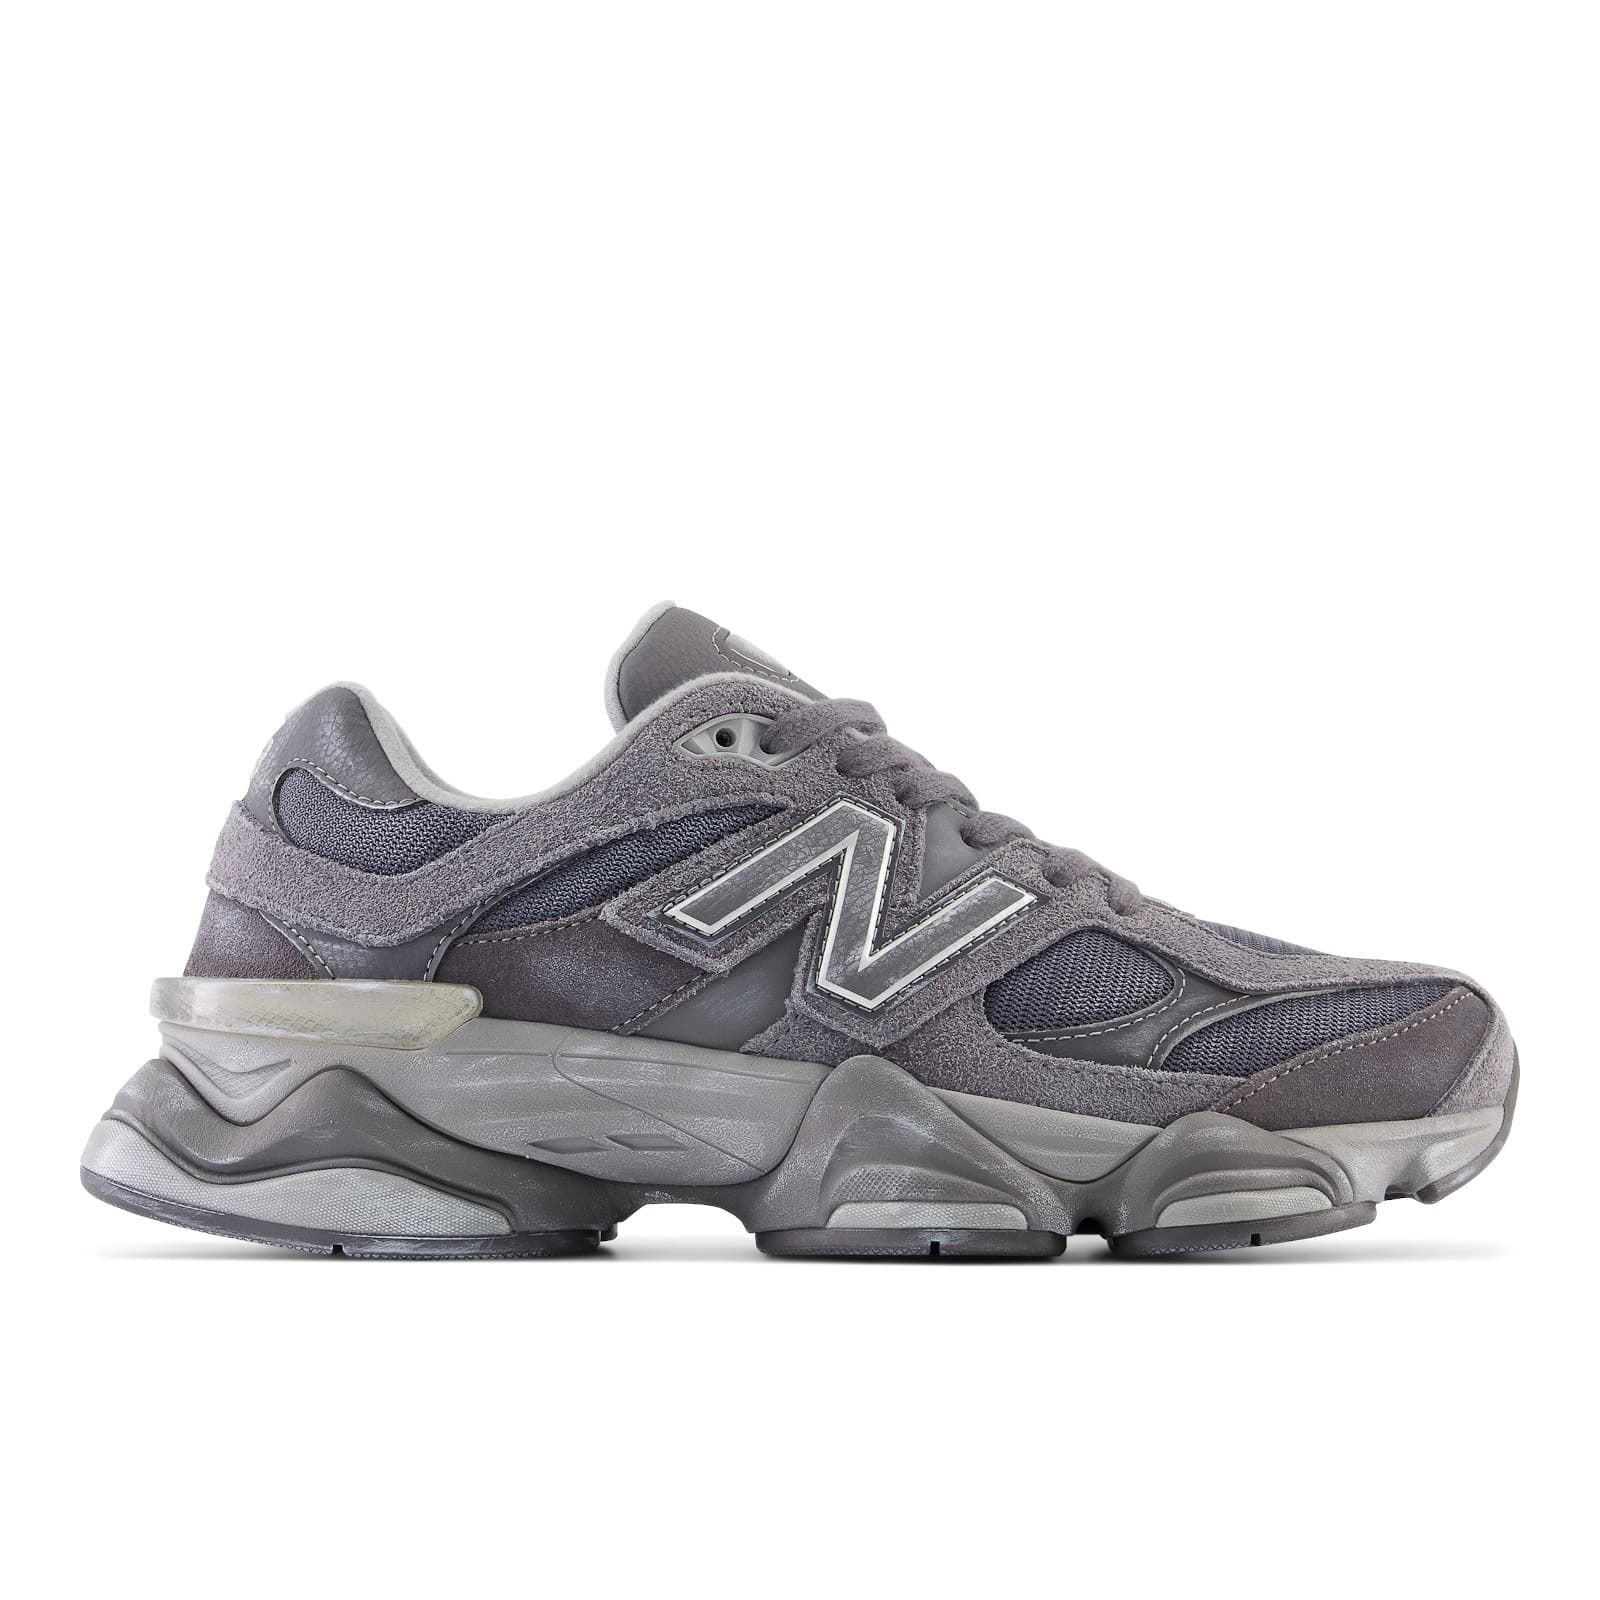 New Balance 90/60 Sneakers Look Best Washed-Out